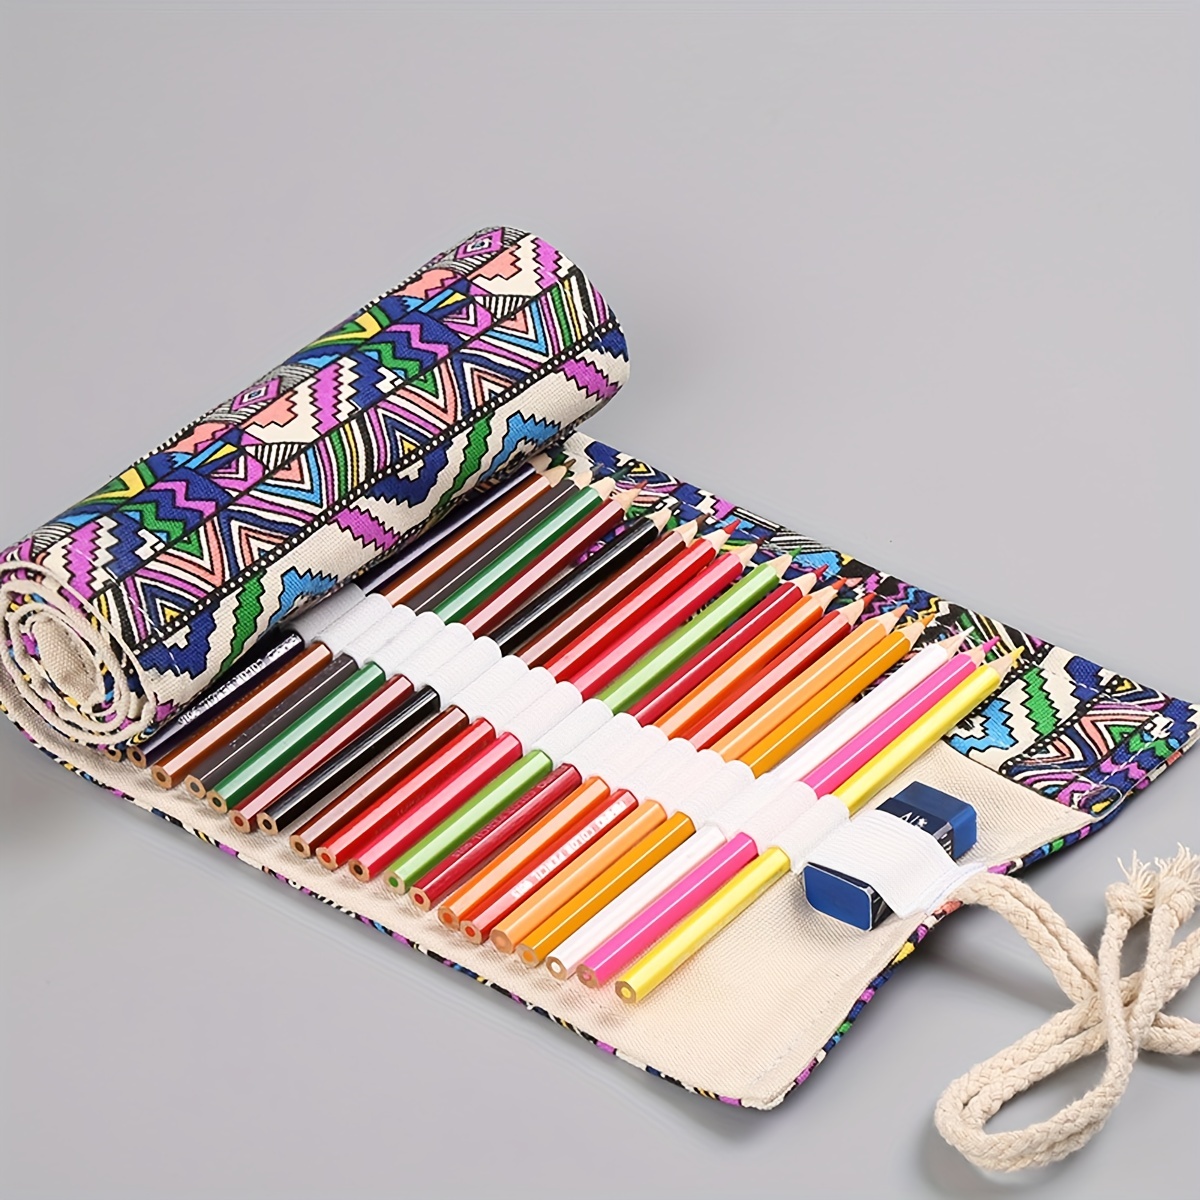 CreooGo Canvas Pencil Wrap, Pencils Roll Case Pouch Hold for 72